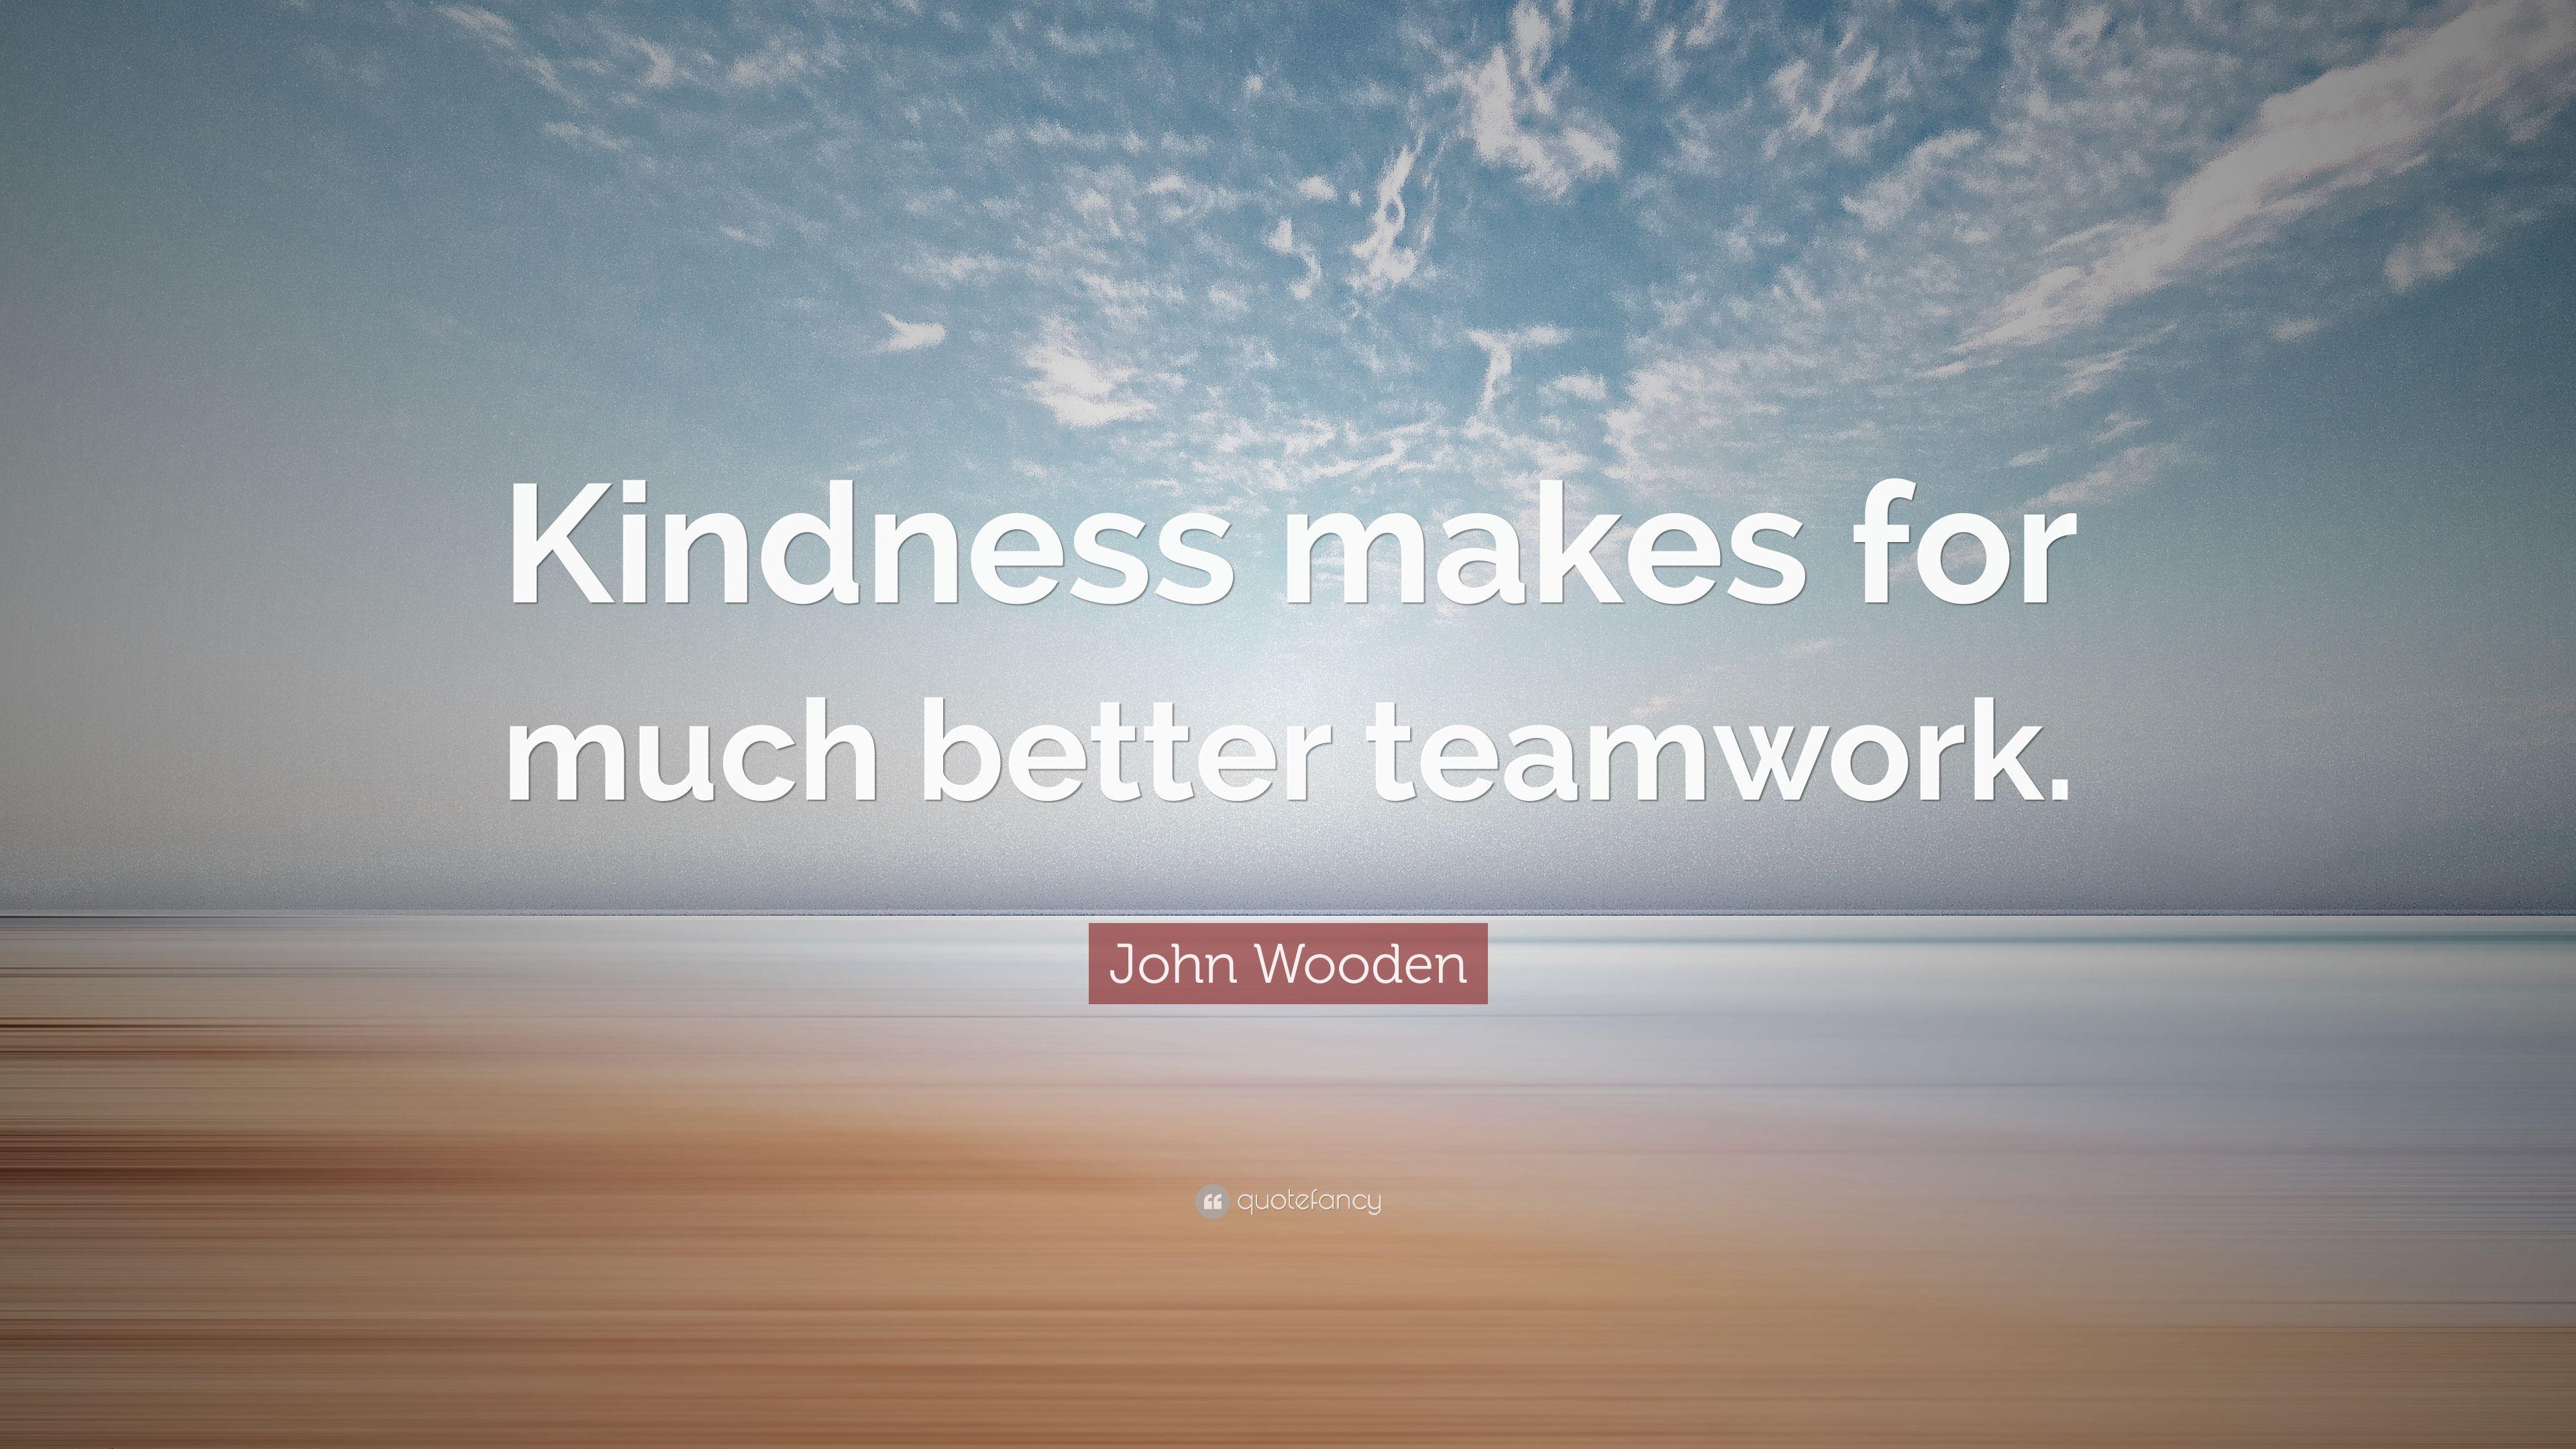 John Wooden Quote: “Kindness makes for much better teamwork.” 12